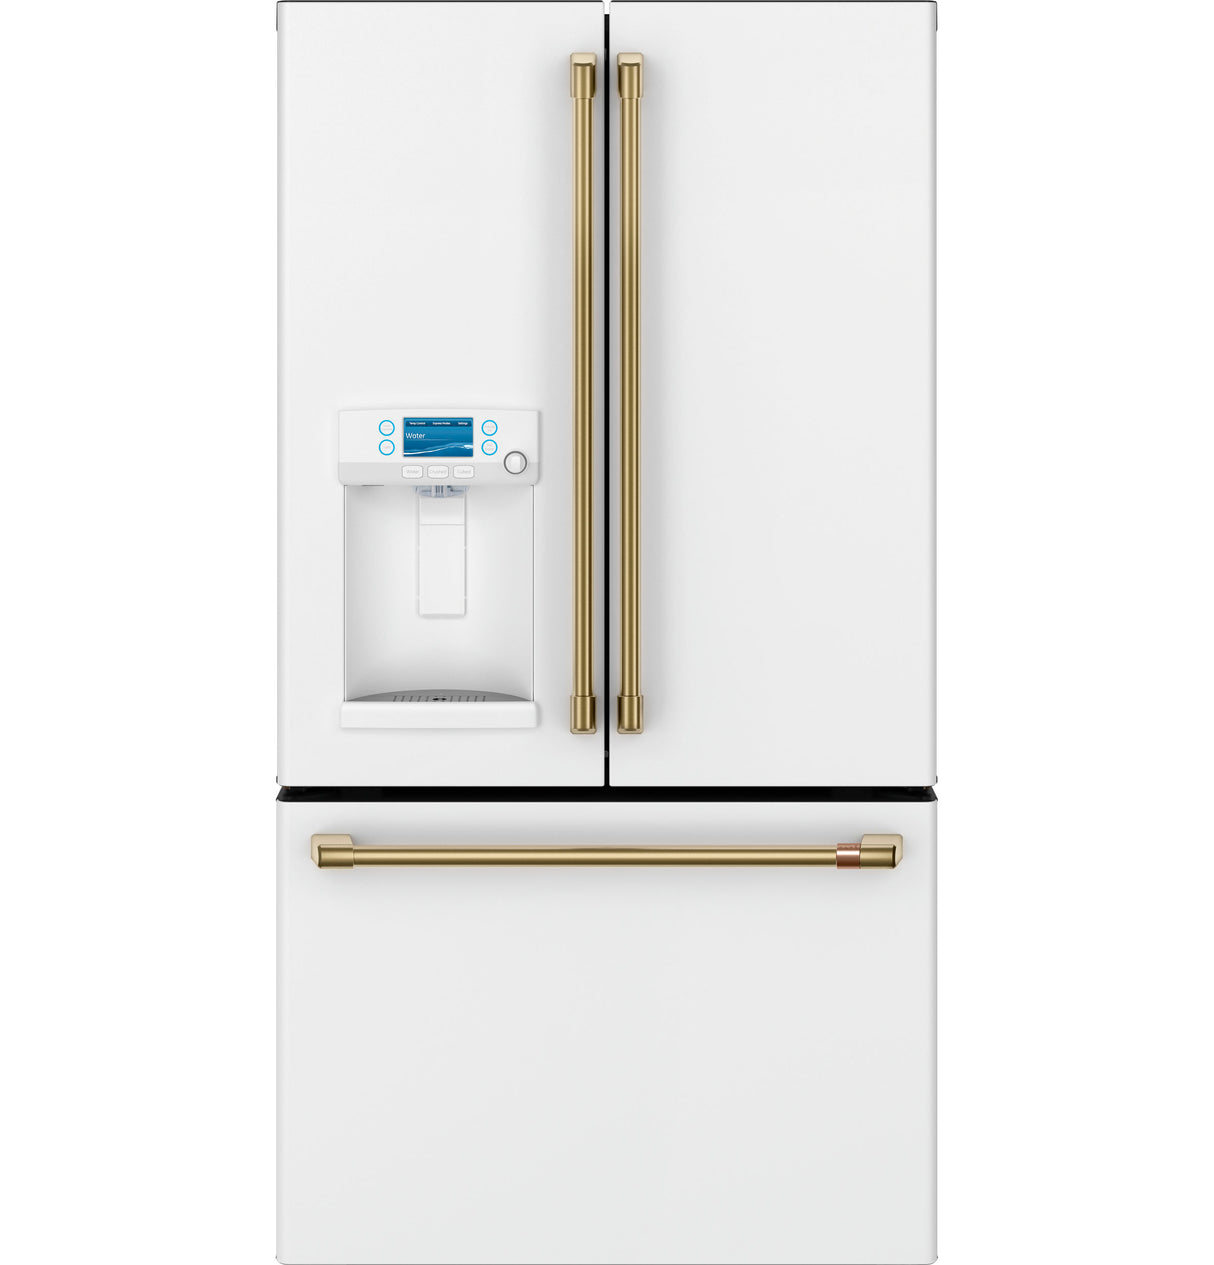 Caf(eback)(TM) ENERGY STAR(R) 22.1 Cu. Ft. Smart Counter-Depth French-Door Refrigerator with Hot Water Dispenser - (CYE22TP4MW2)